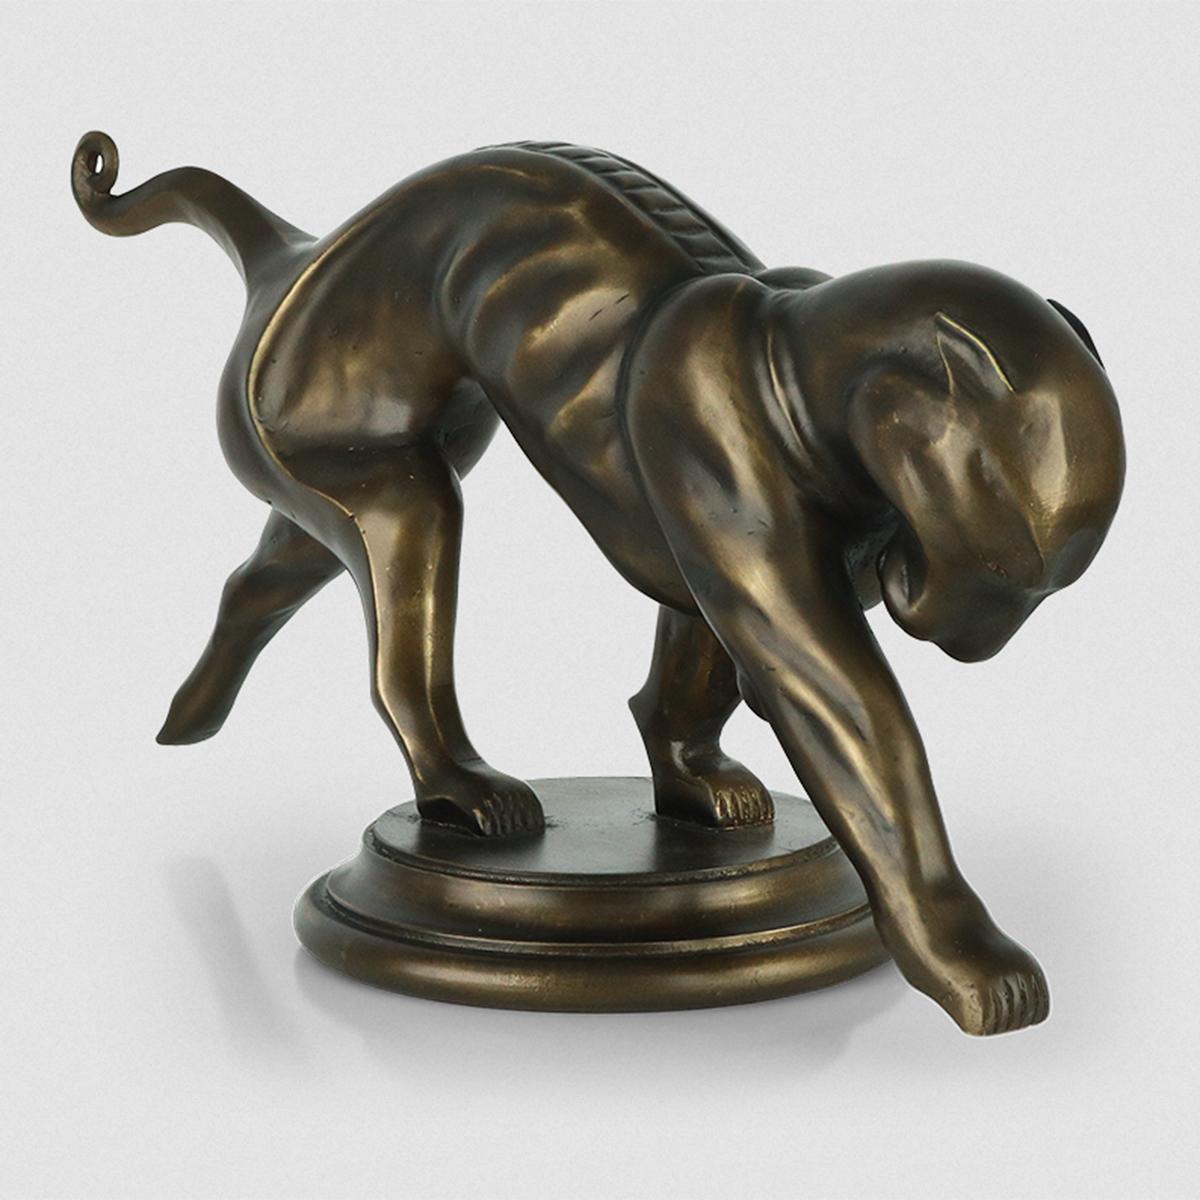 Sculpture panther mahogany all in hand carved
solid mahogany wood with hand painted bronze finish.